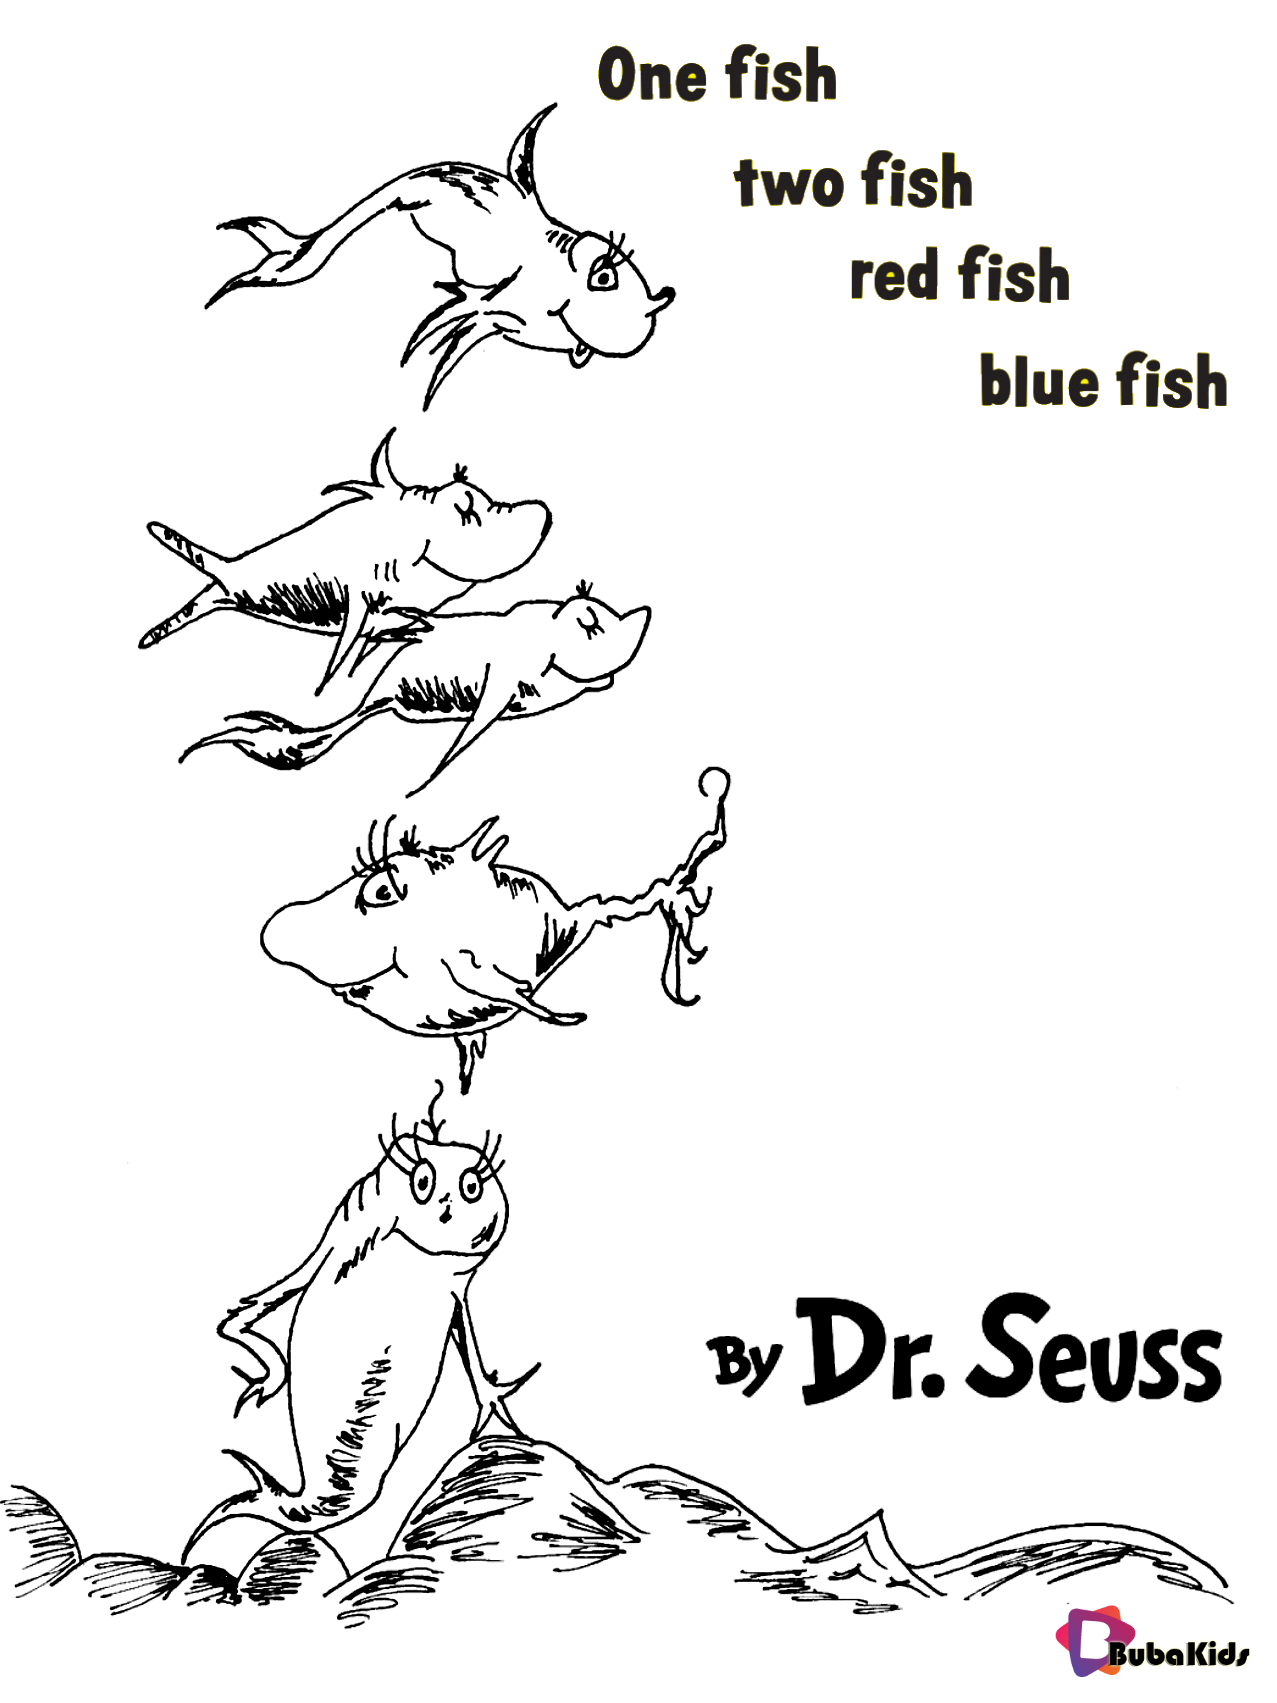 Dr seuss One fish two fish red fish blue fish free coloring pages Wallpaper